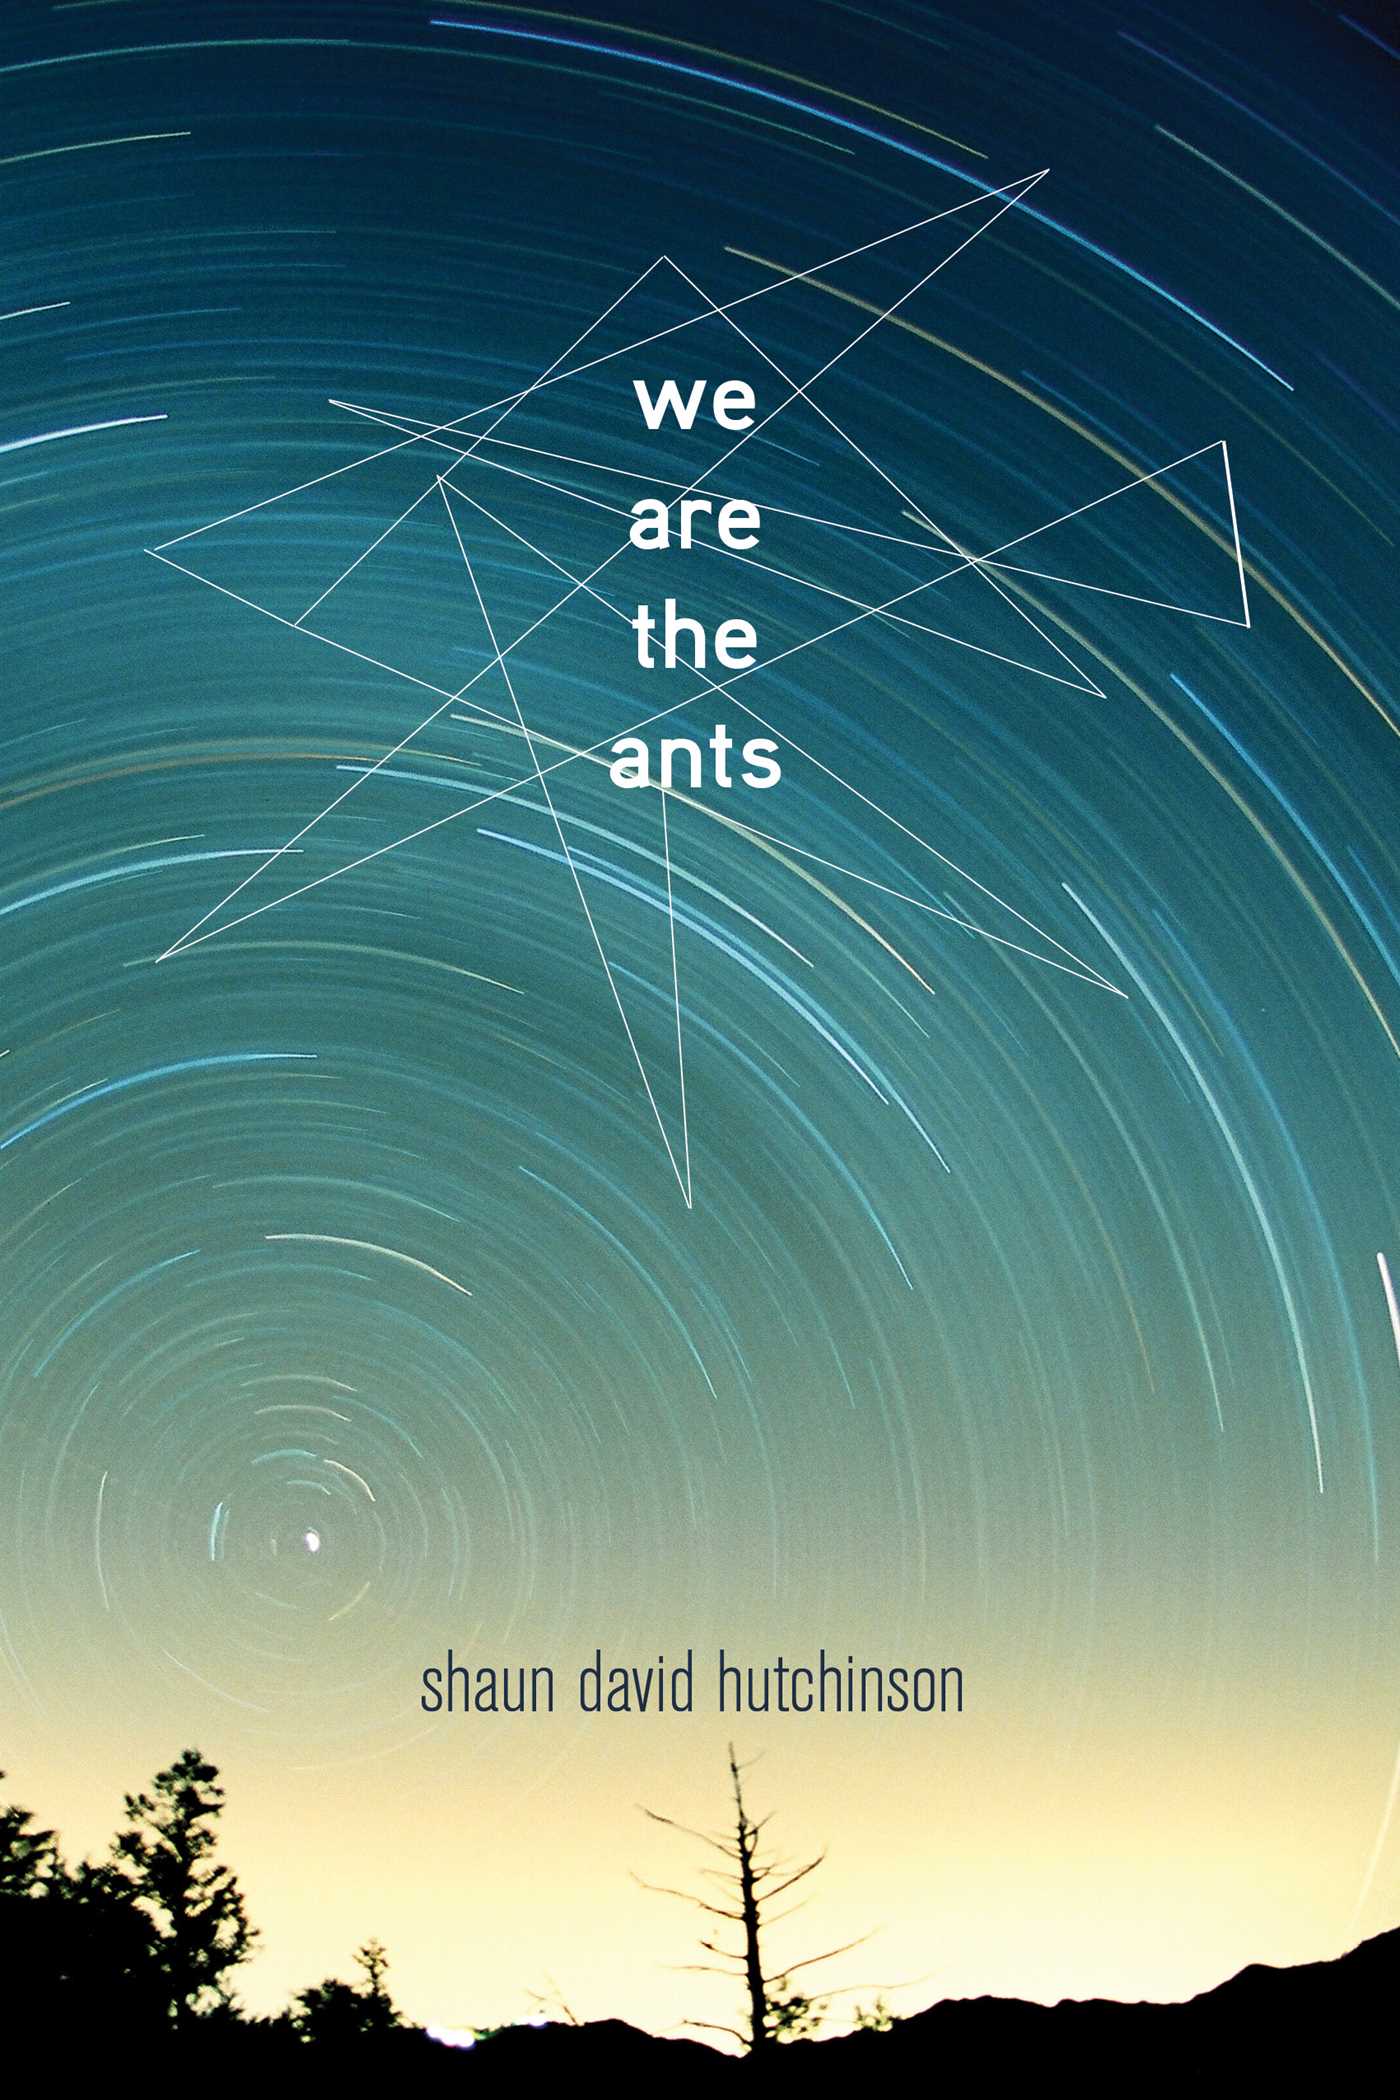 We are the Ants (Available in Spanish through Hipocampo Booksellers)